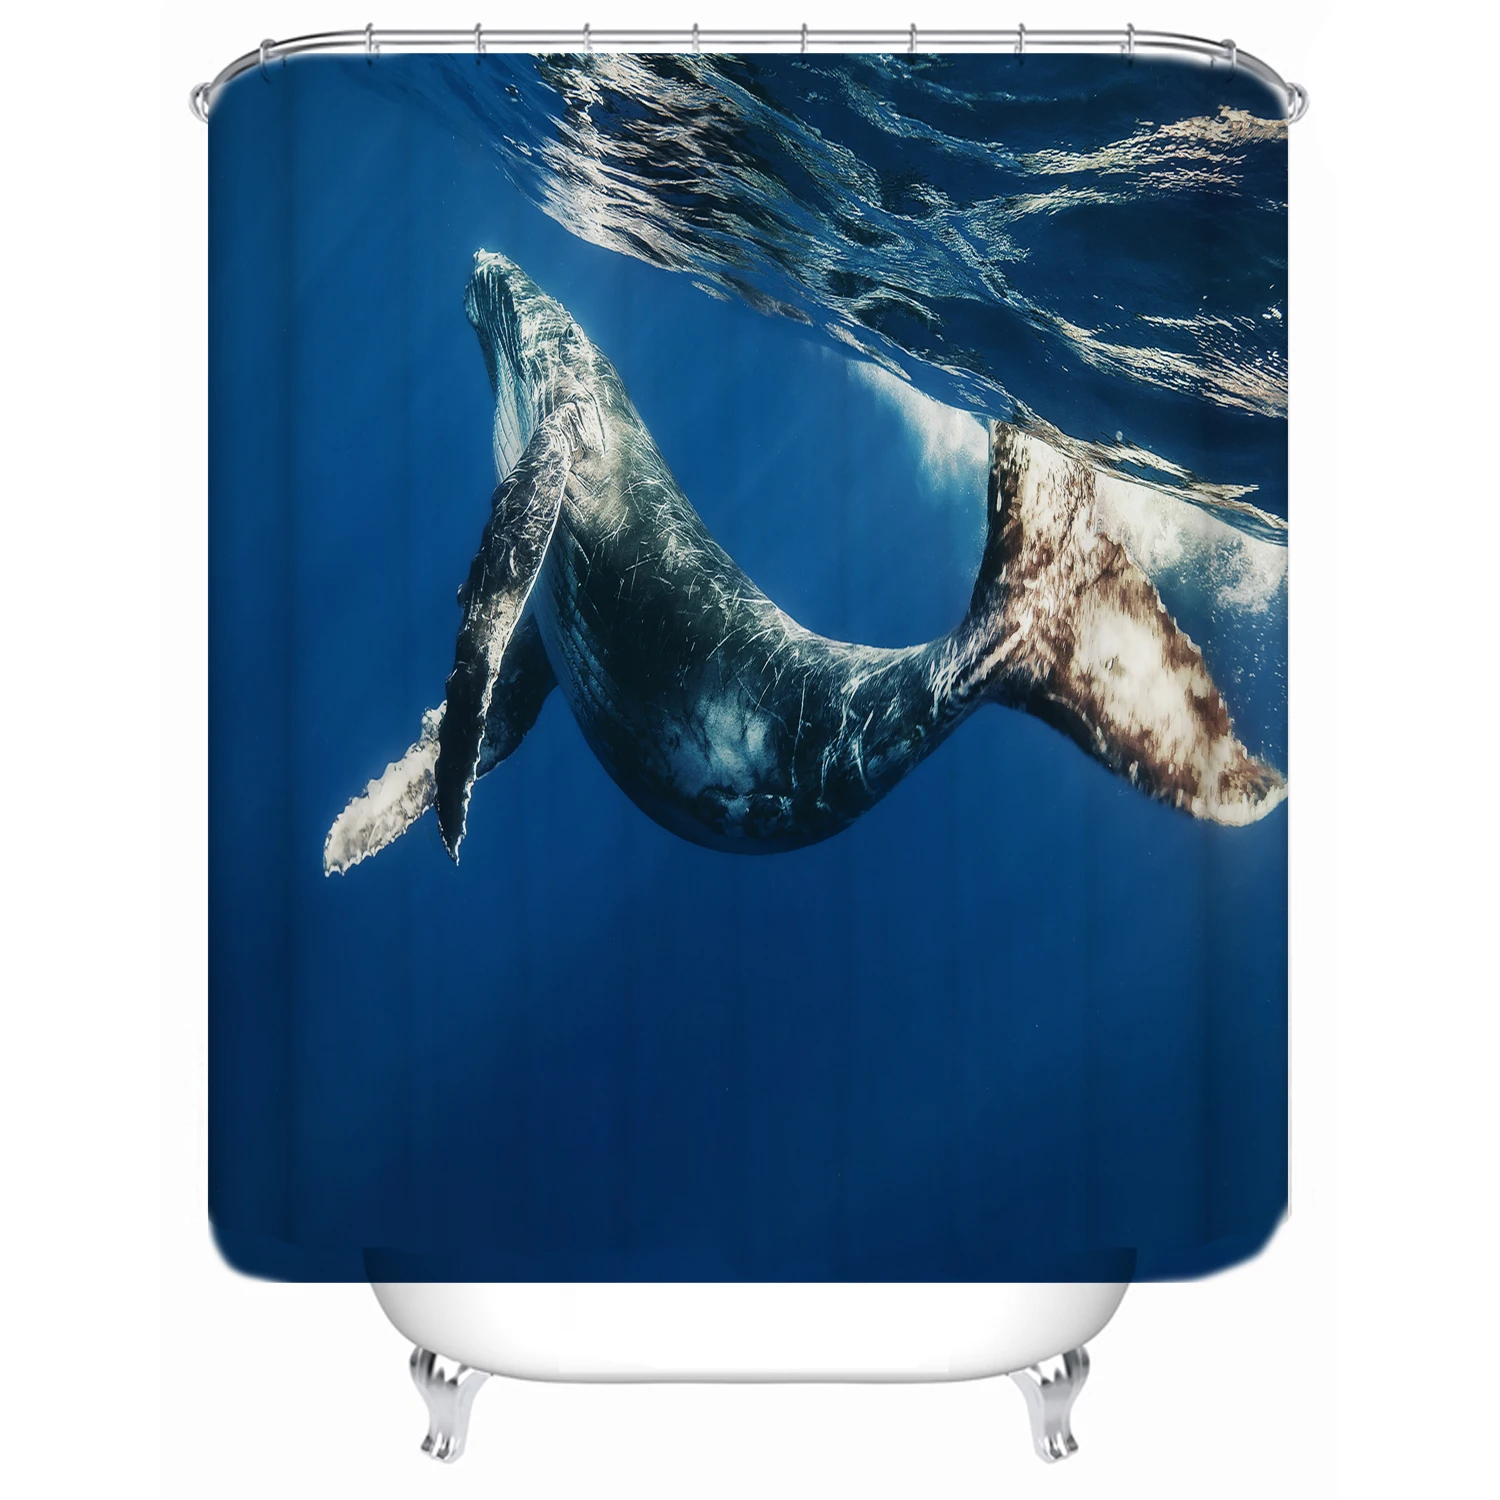 

Bathroom shower curtain partition bathtub waterproof shower curtain simple seabed blue whale custom printed shower curtain, Picture